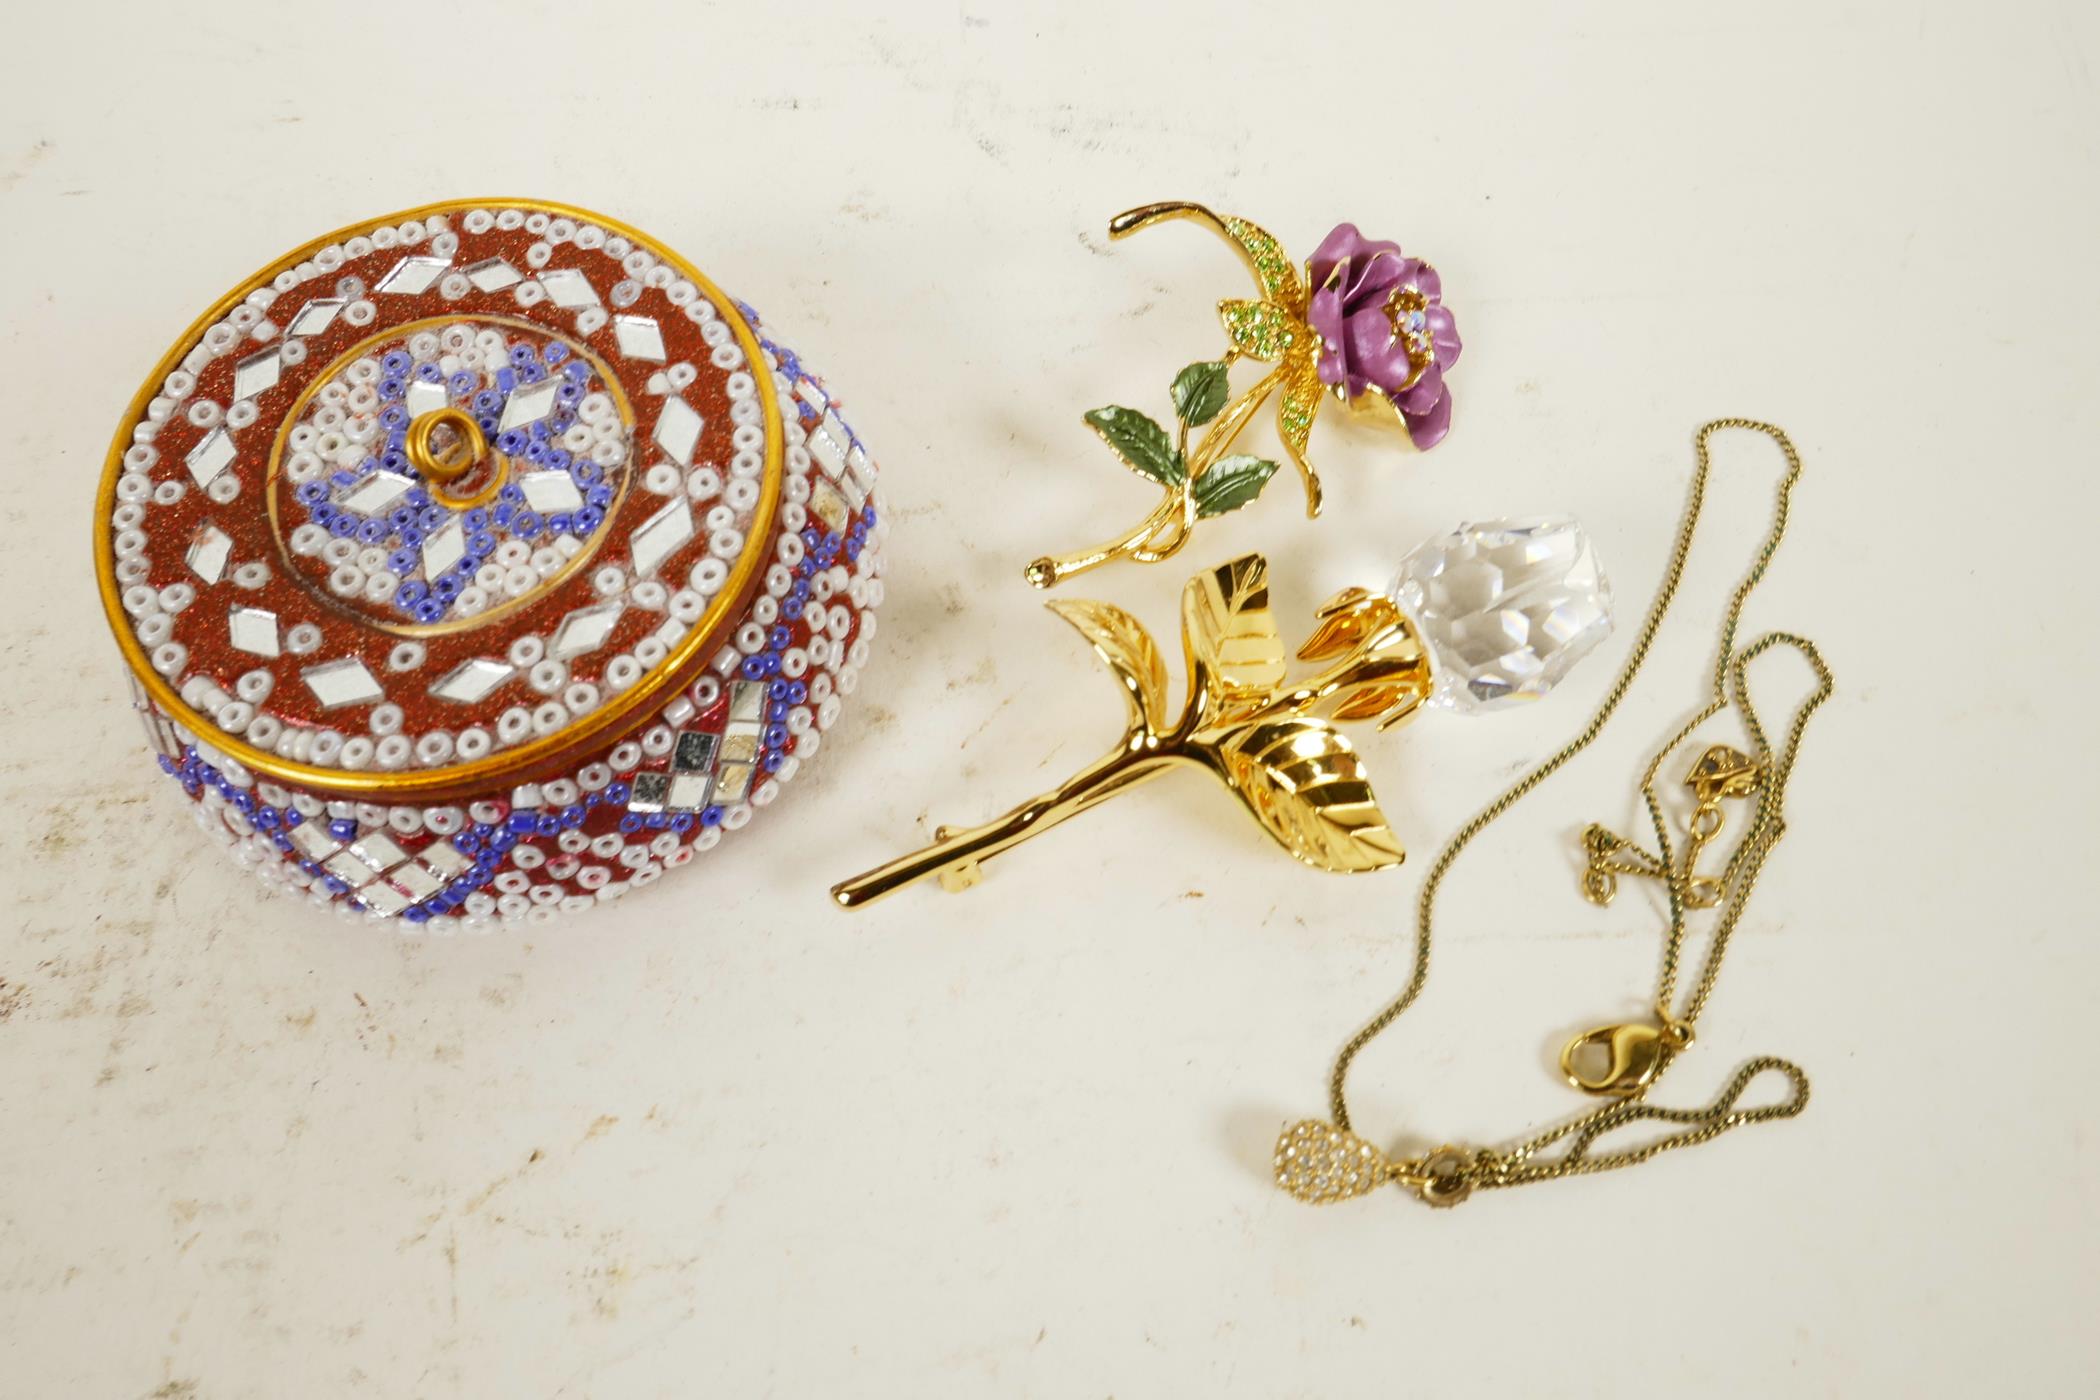 Two Swarovski 'Rose' crystal and gilt flower brooches, a Swarovski pendant, and a micro-mosaic